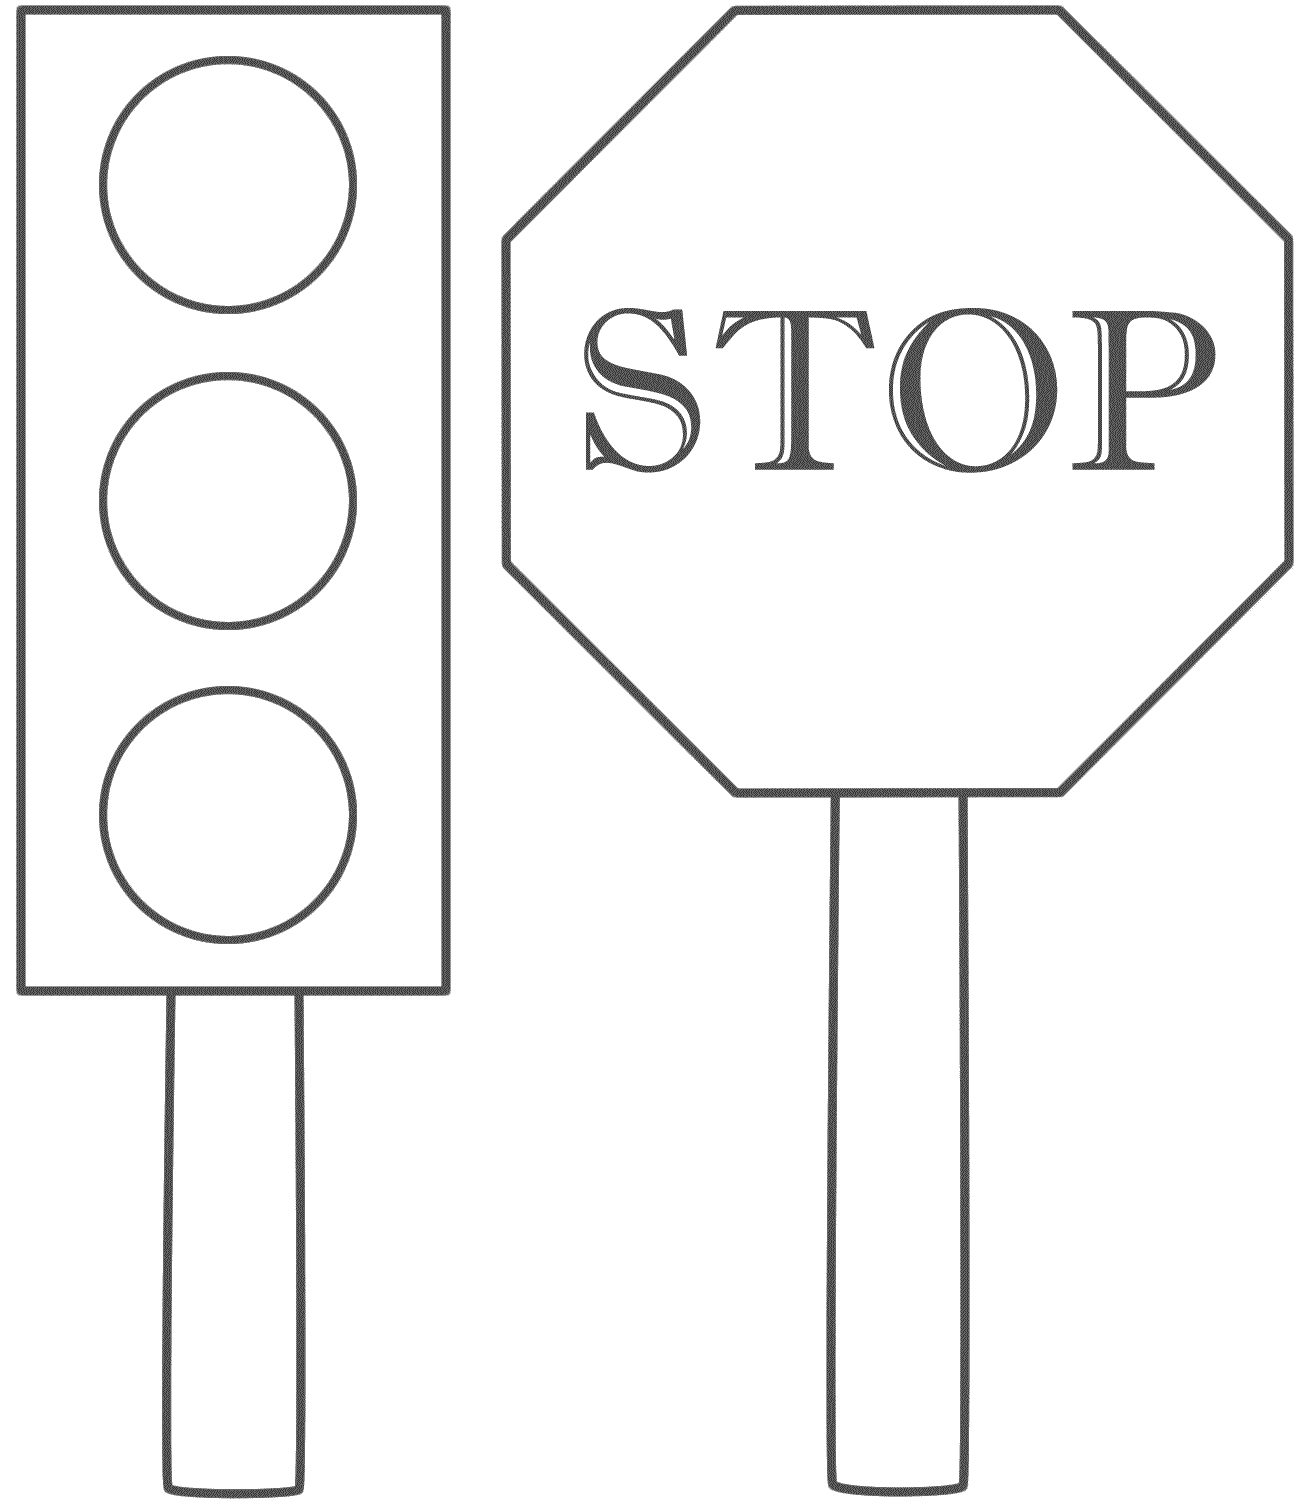 traffic light coloring page traffic lights stop sign coloring page doprava traffic light page coloring 